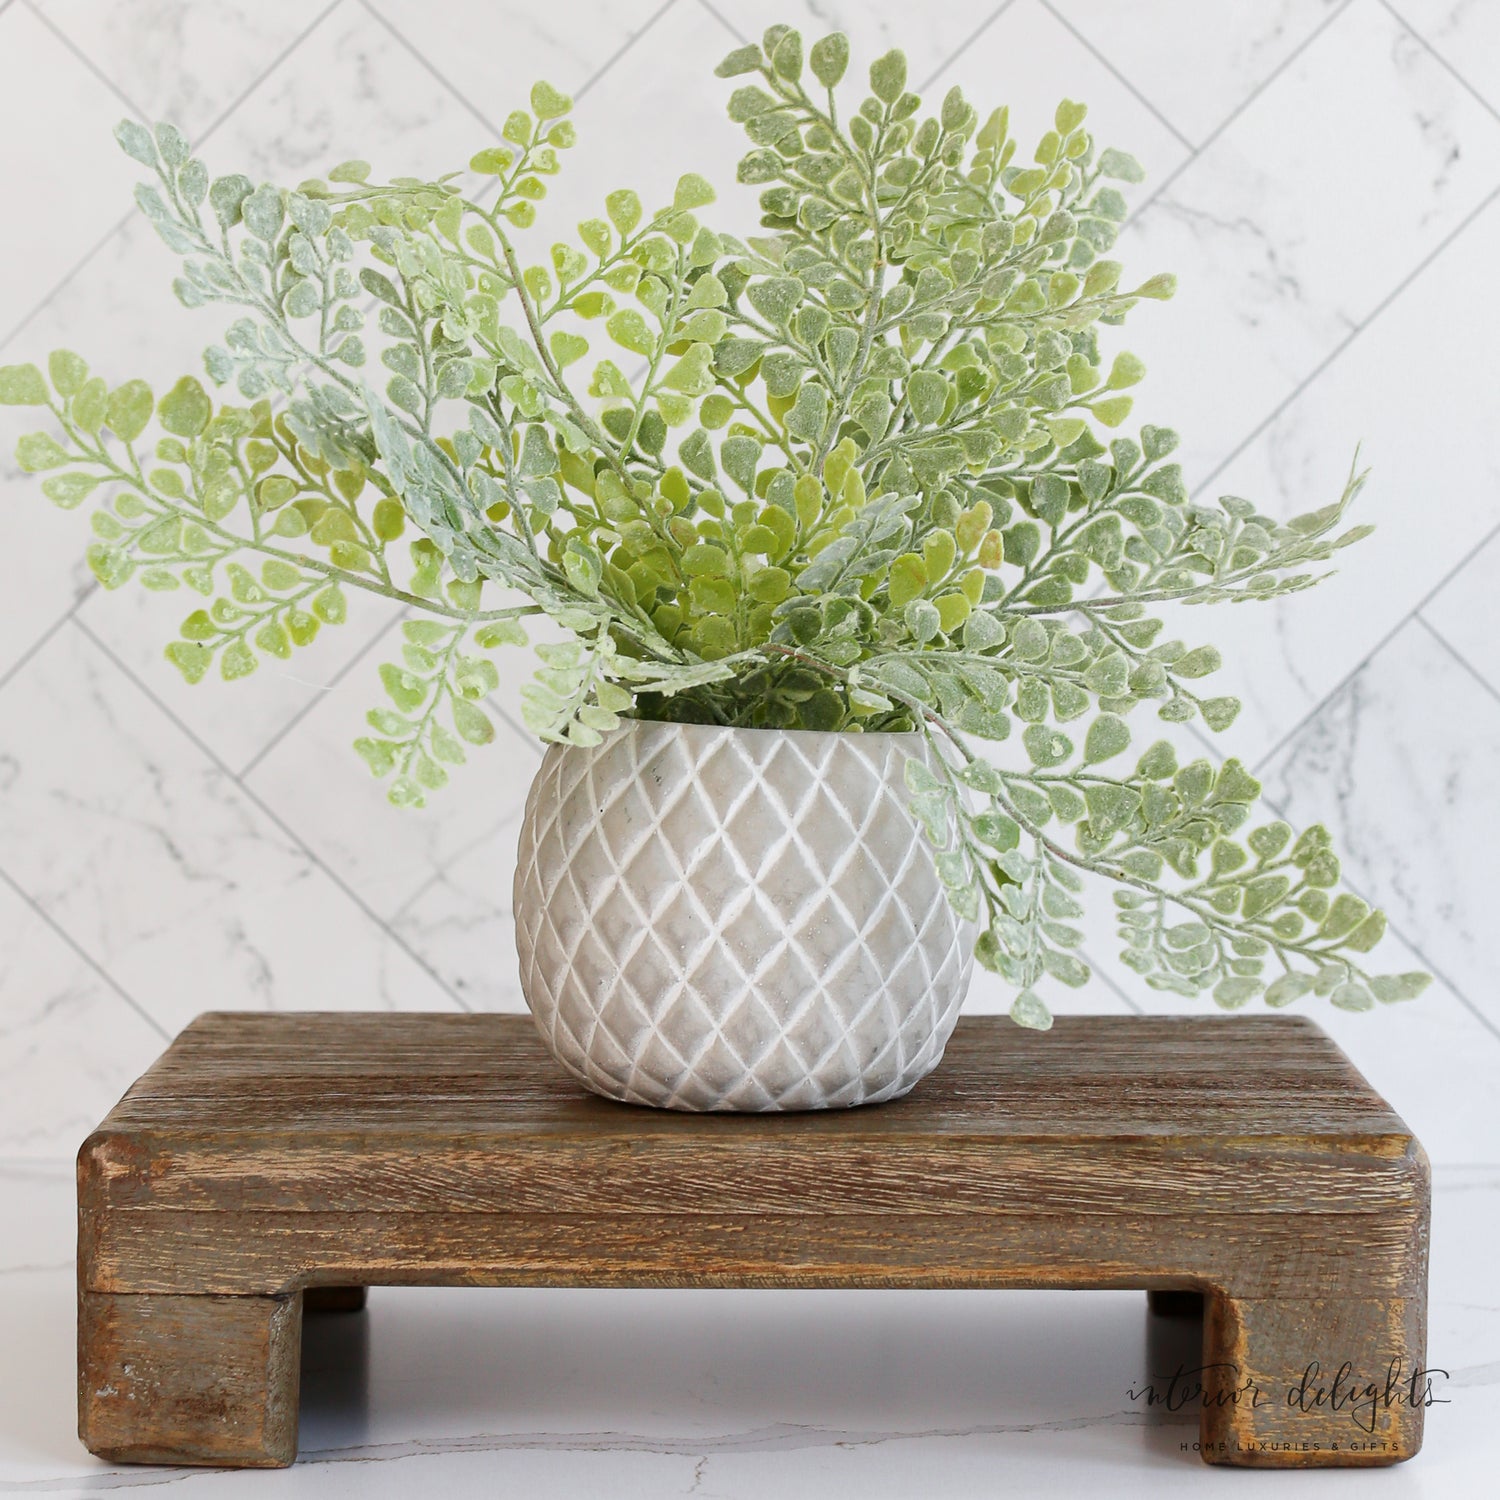 Greenery:  Potted